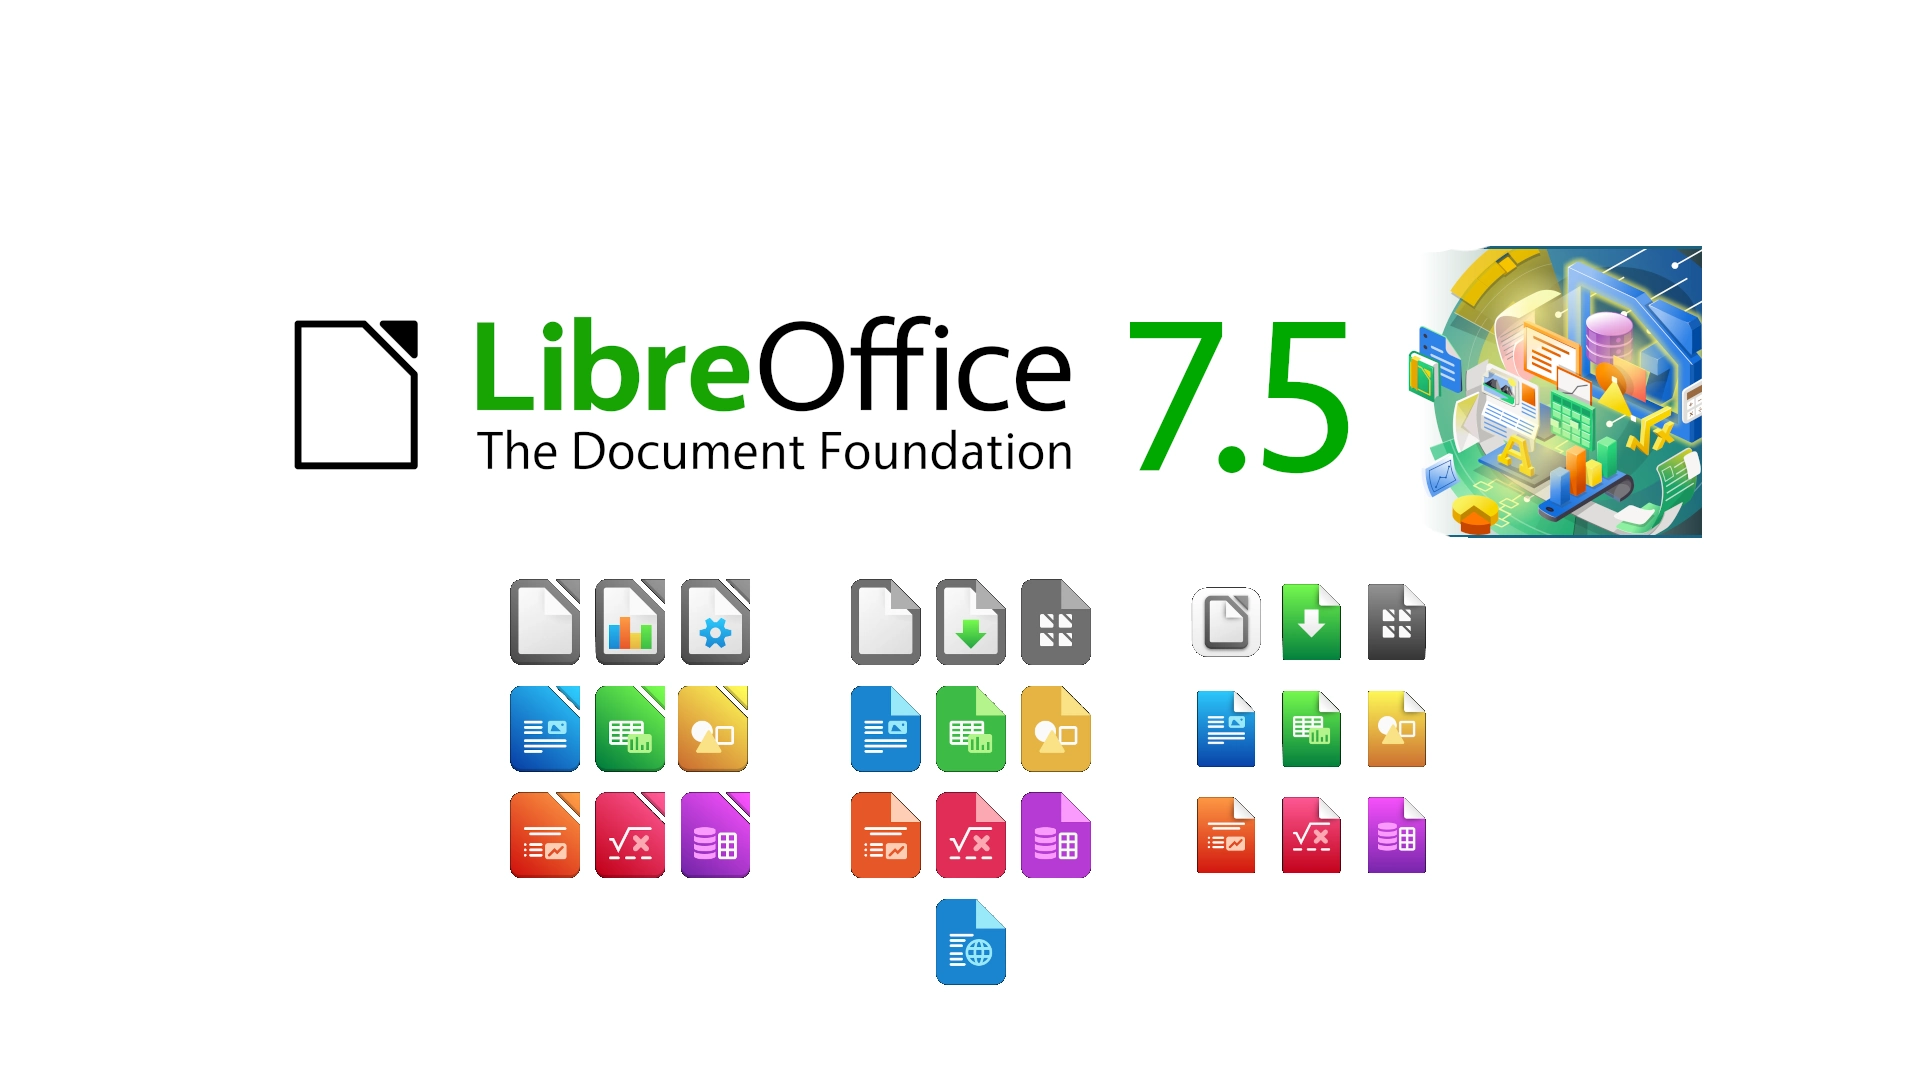 LibreOffice 7.5 Open-Source Office Suite Officially Released, This Is What’s New